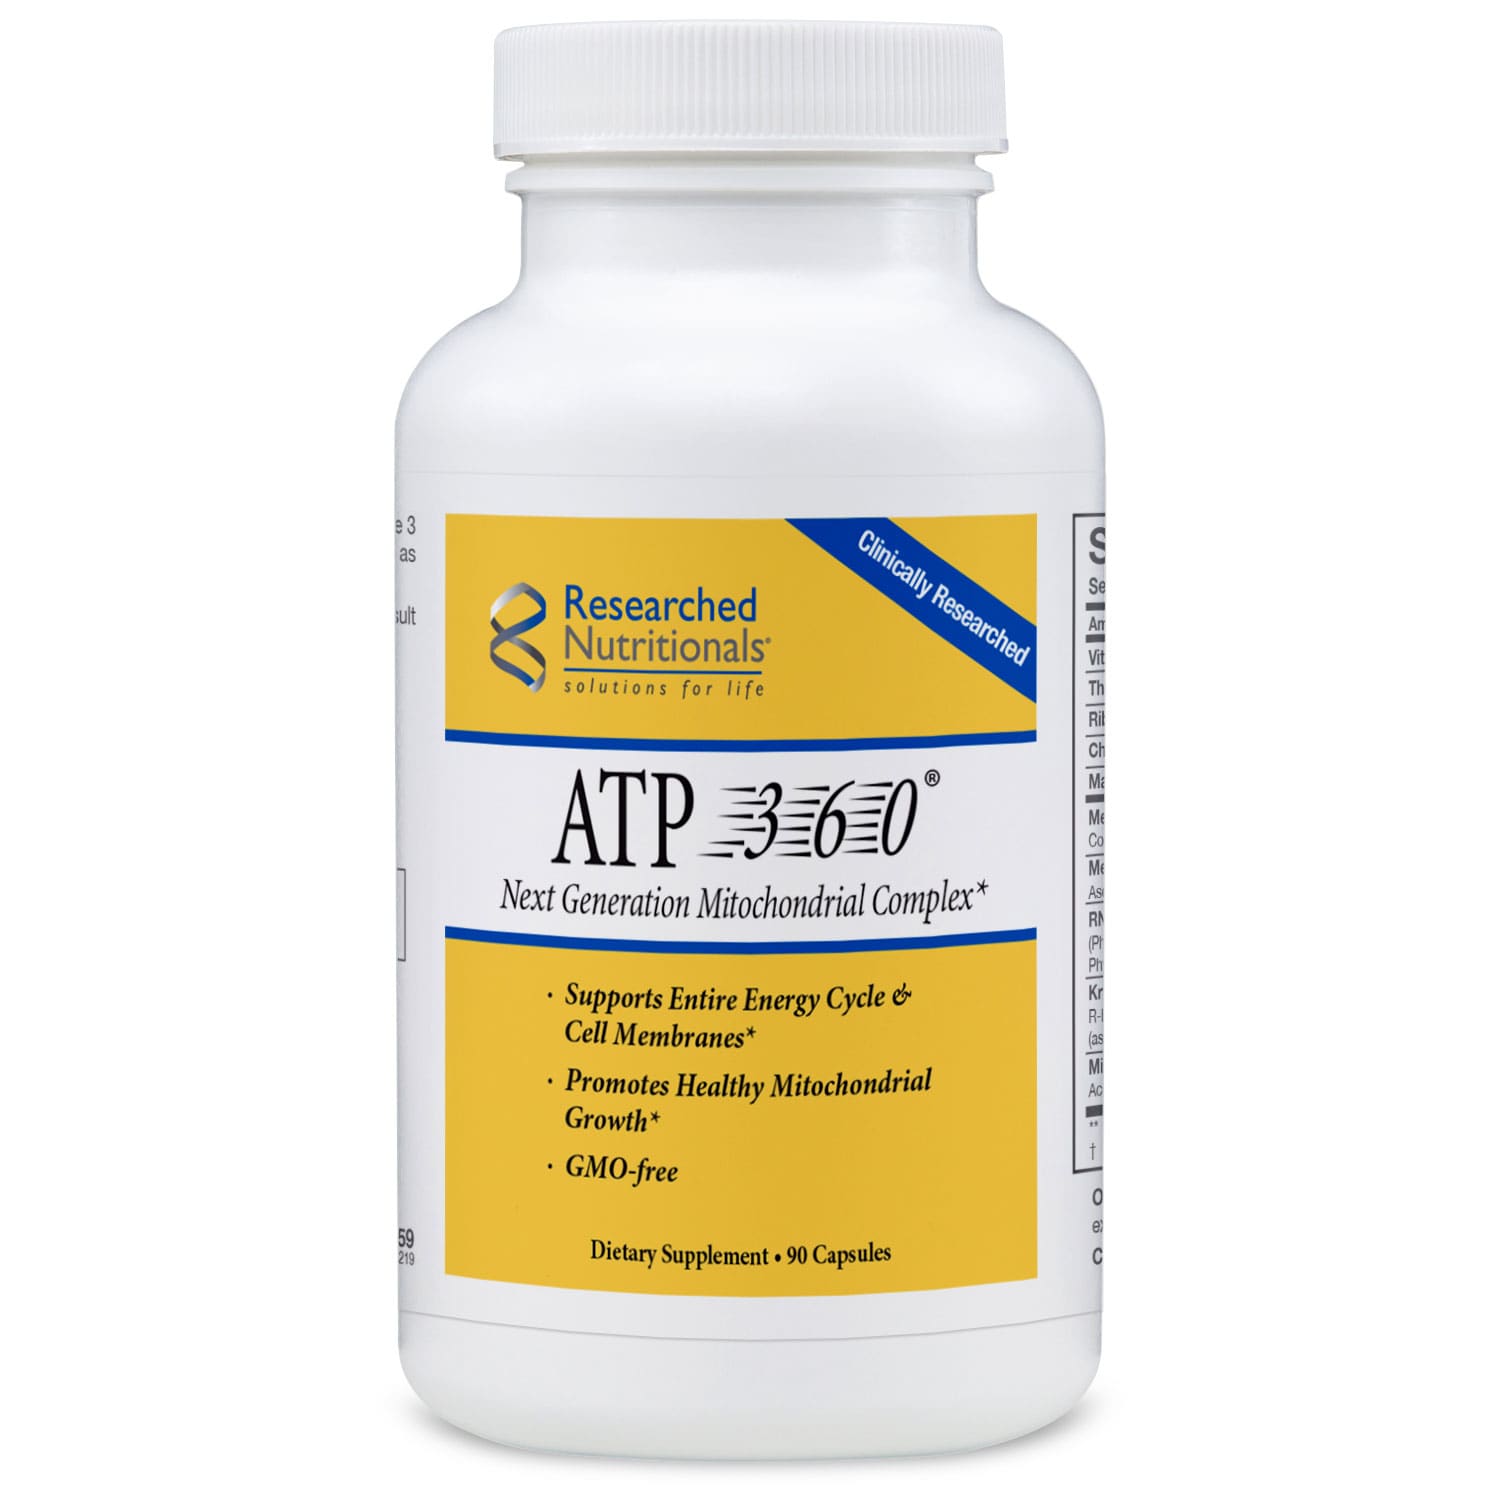 RESEARCHED NUTRITIONALS - ATP 360